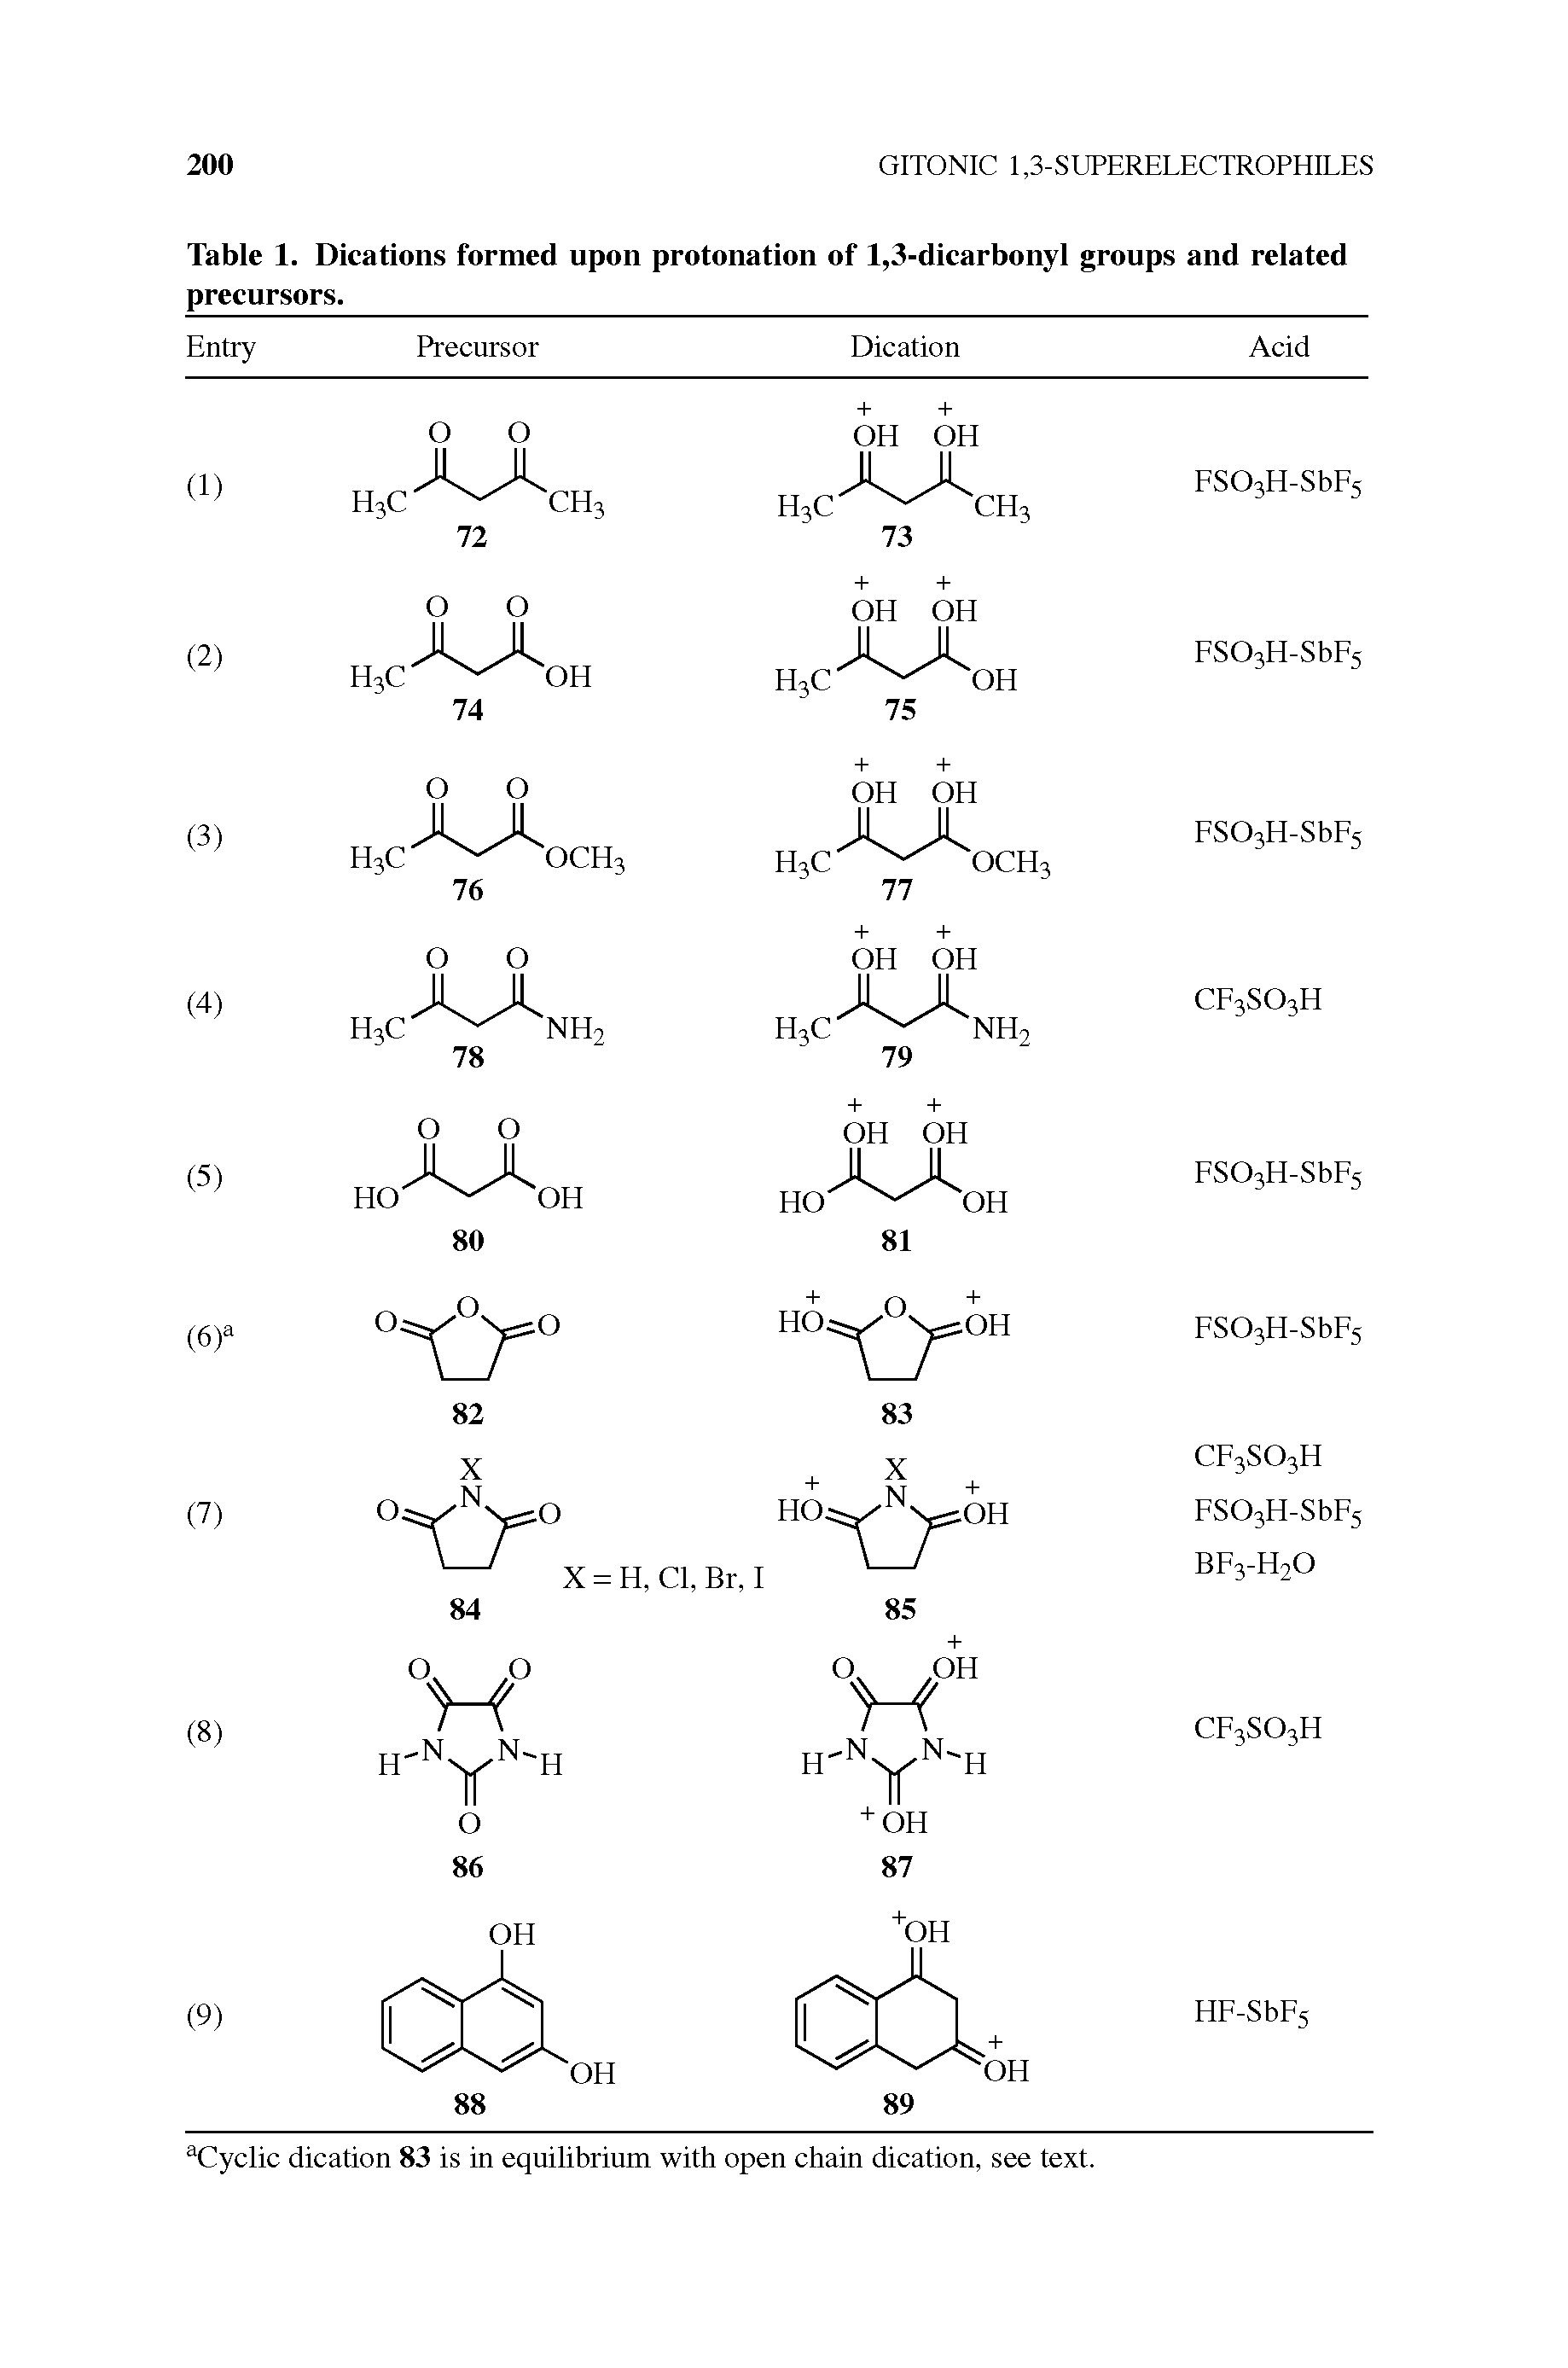 Table 1. Dications formed upon protonation of 1,3-dicarbonyl groups and related precursors.